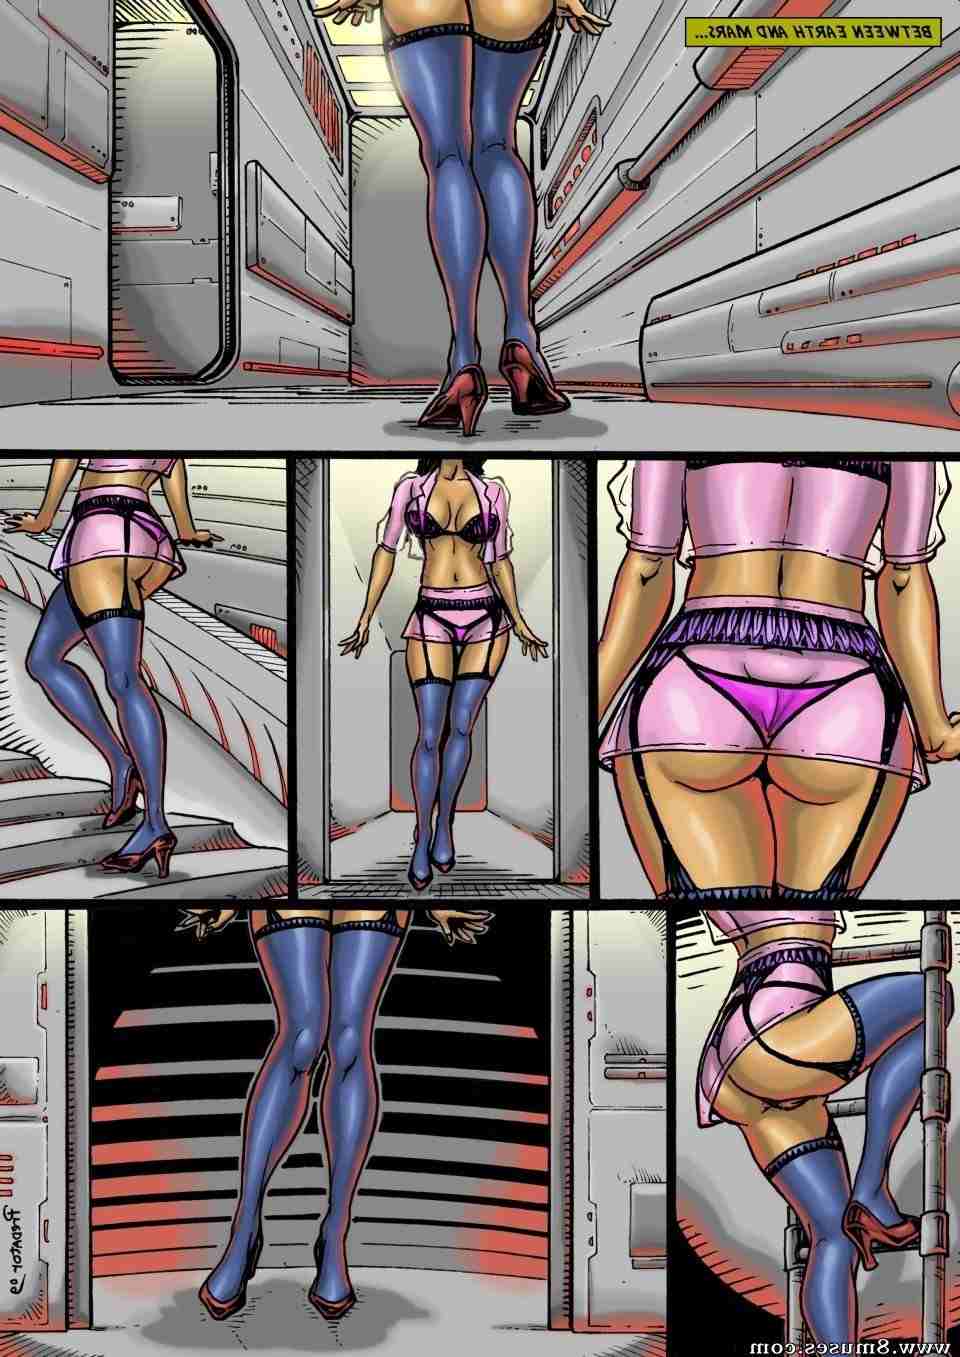 Various-Authors/Predator/Sex-Droids-in-Space Sex_Droids_in_Space__8muses_-_Sex_and_Porn_Comics_2.jpg